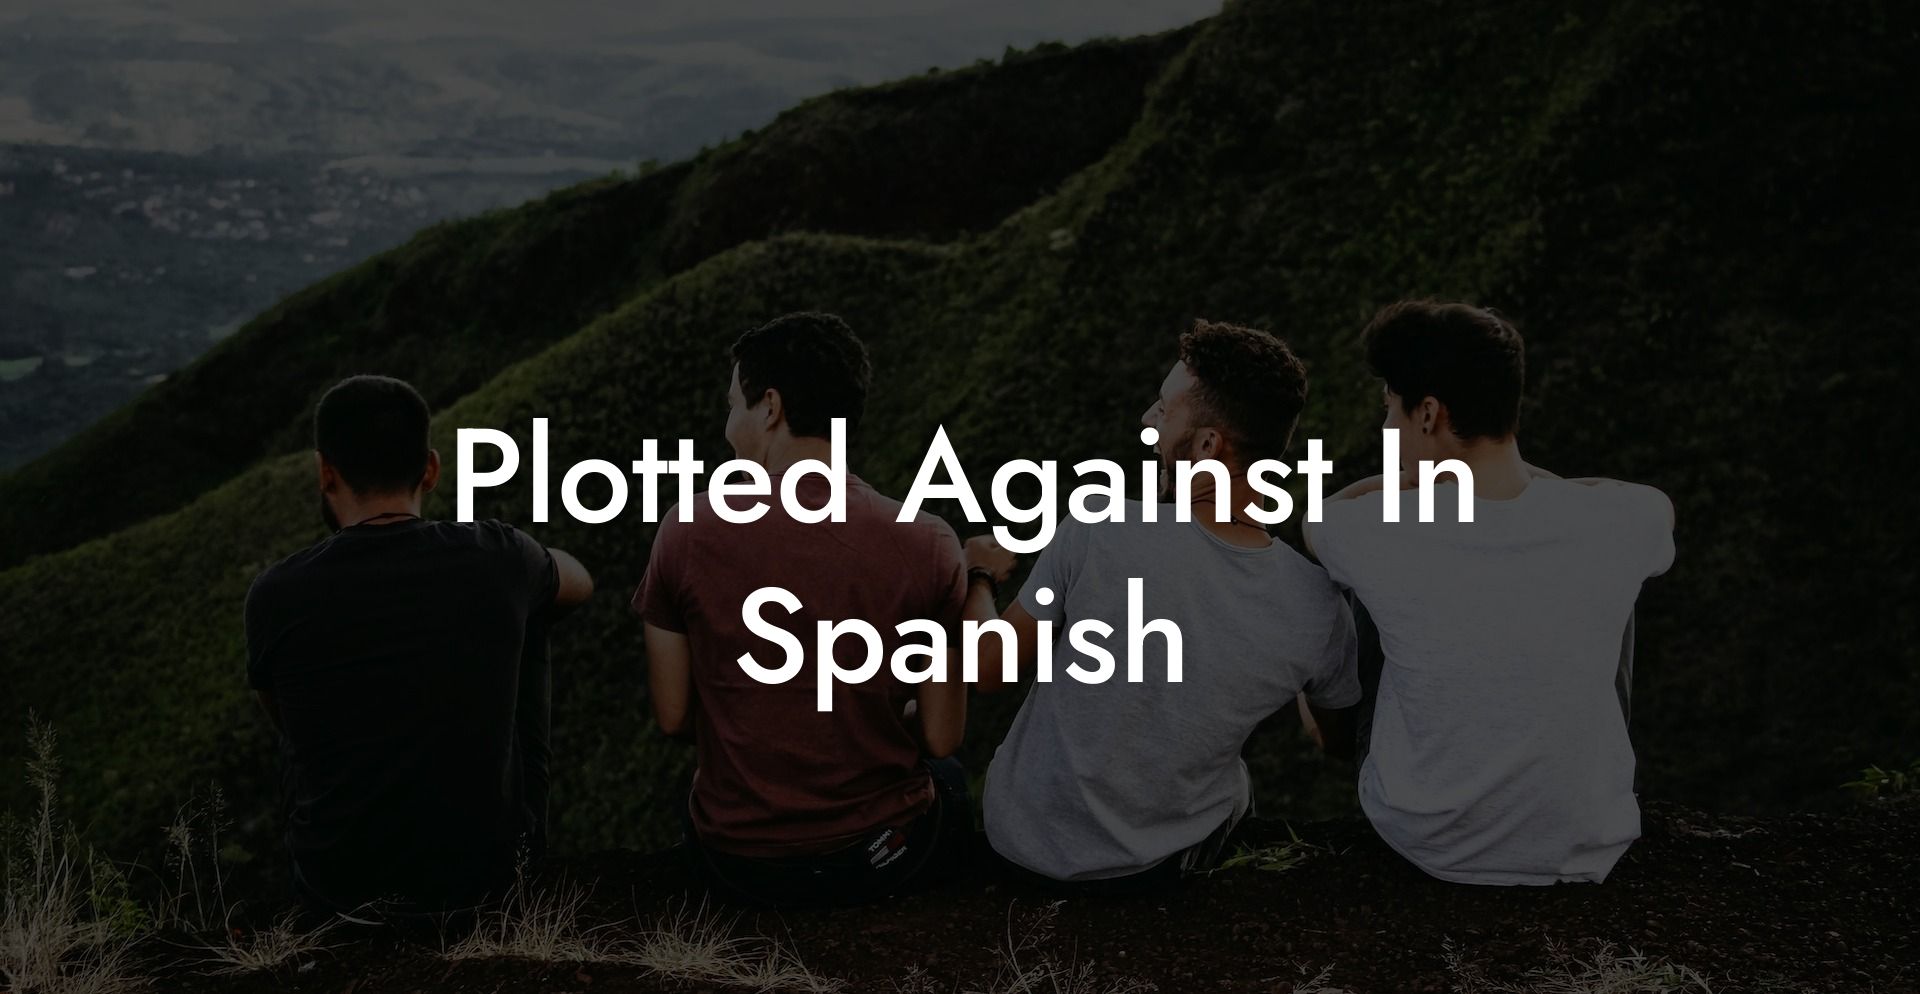 Plotted Against In Spanish